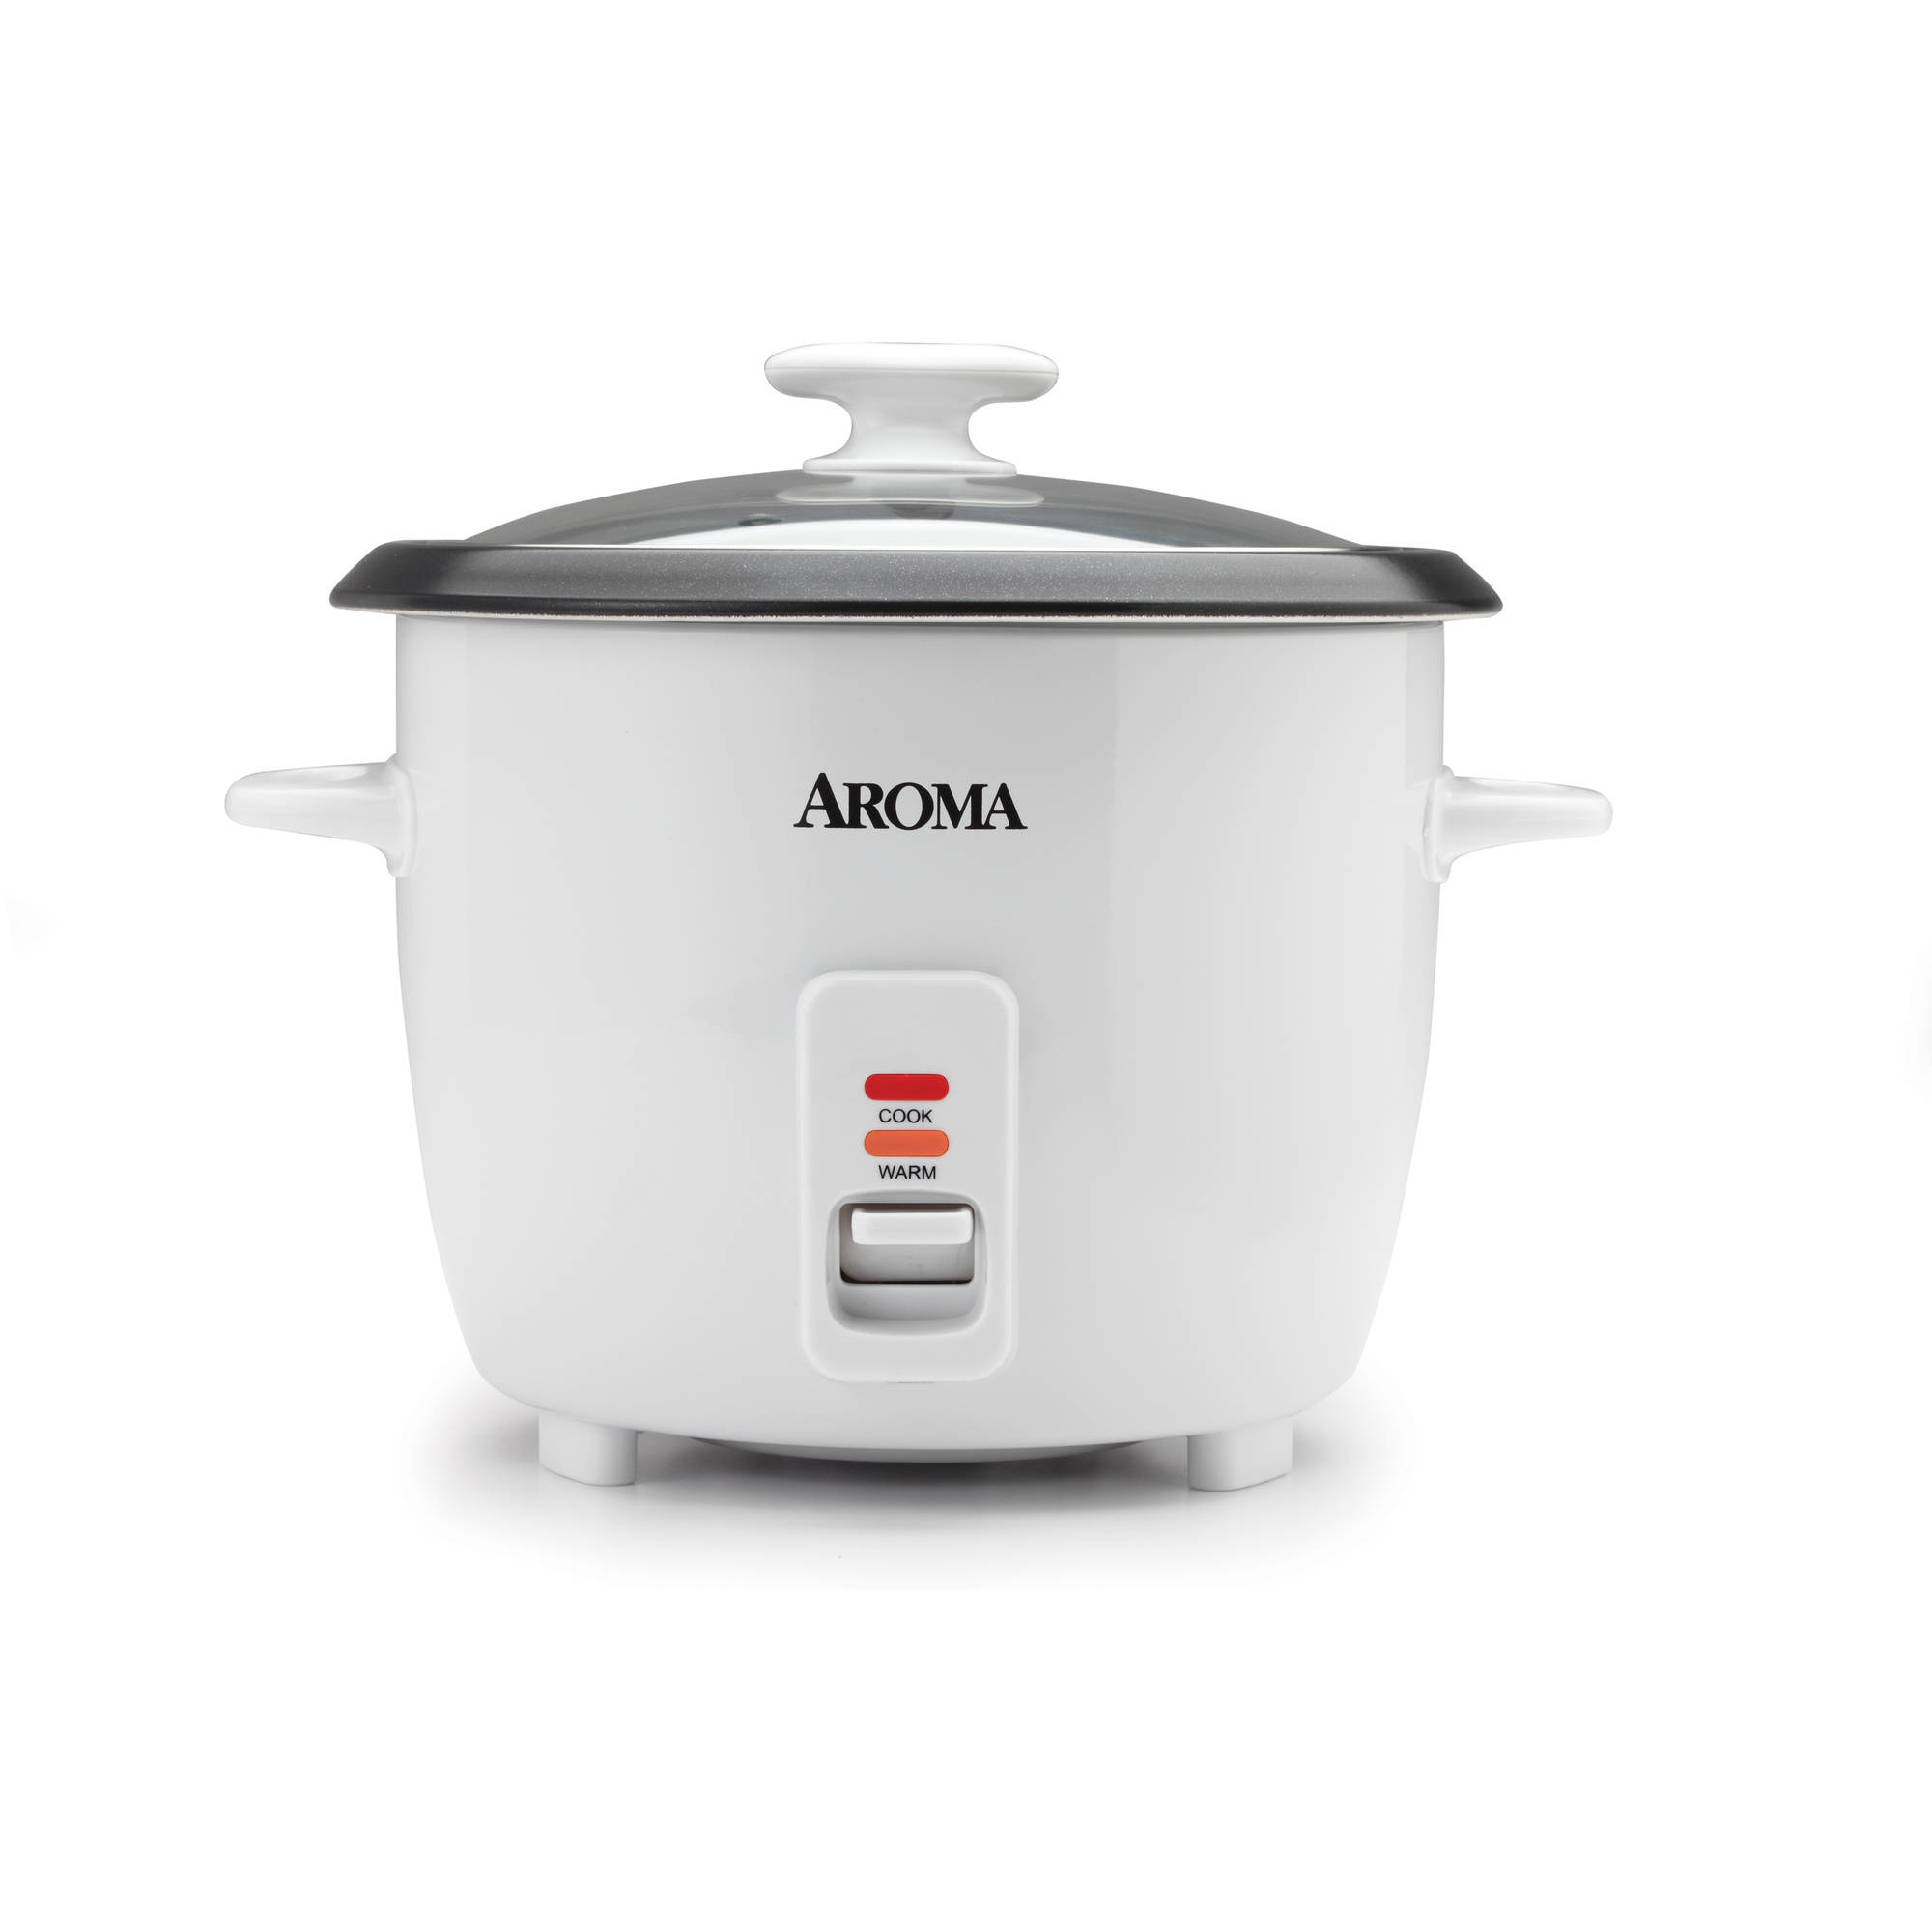 Aroma 14-cup rice cooker for $14